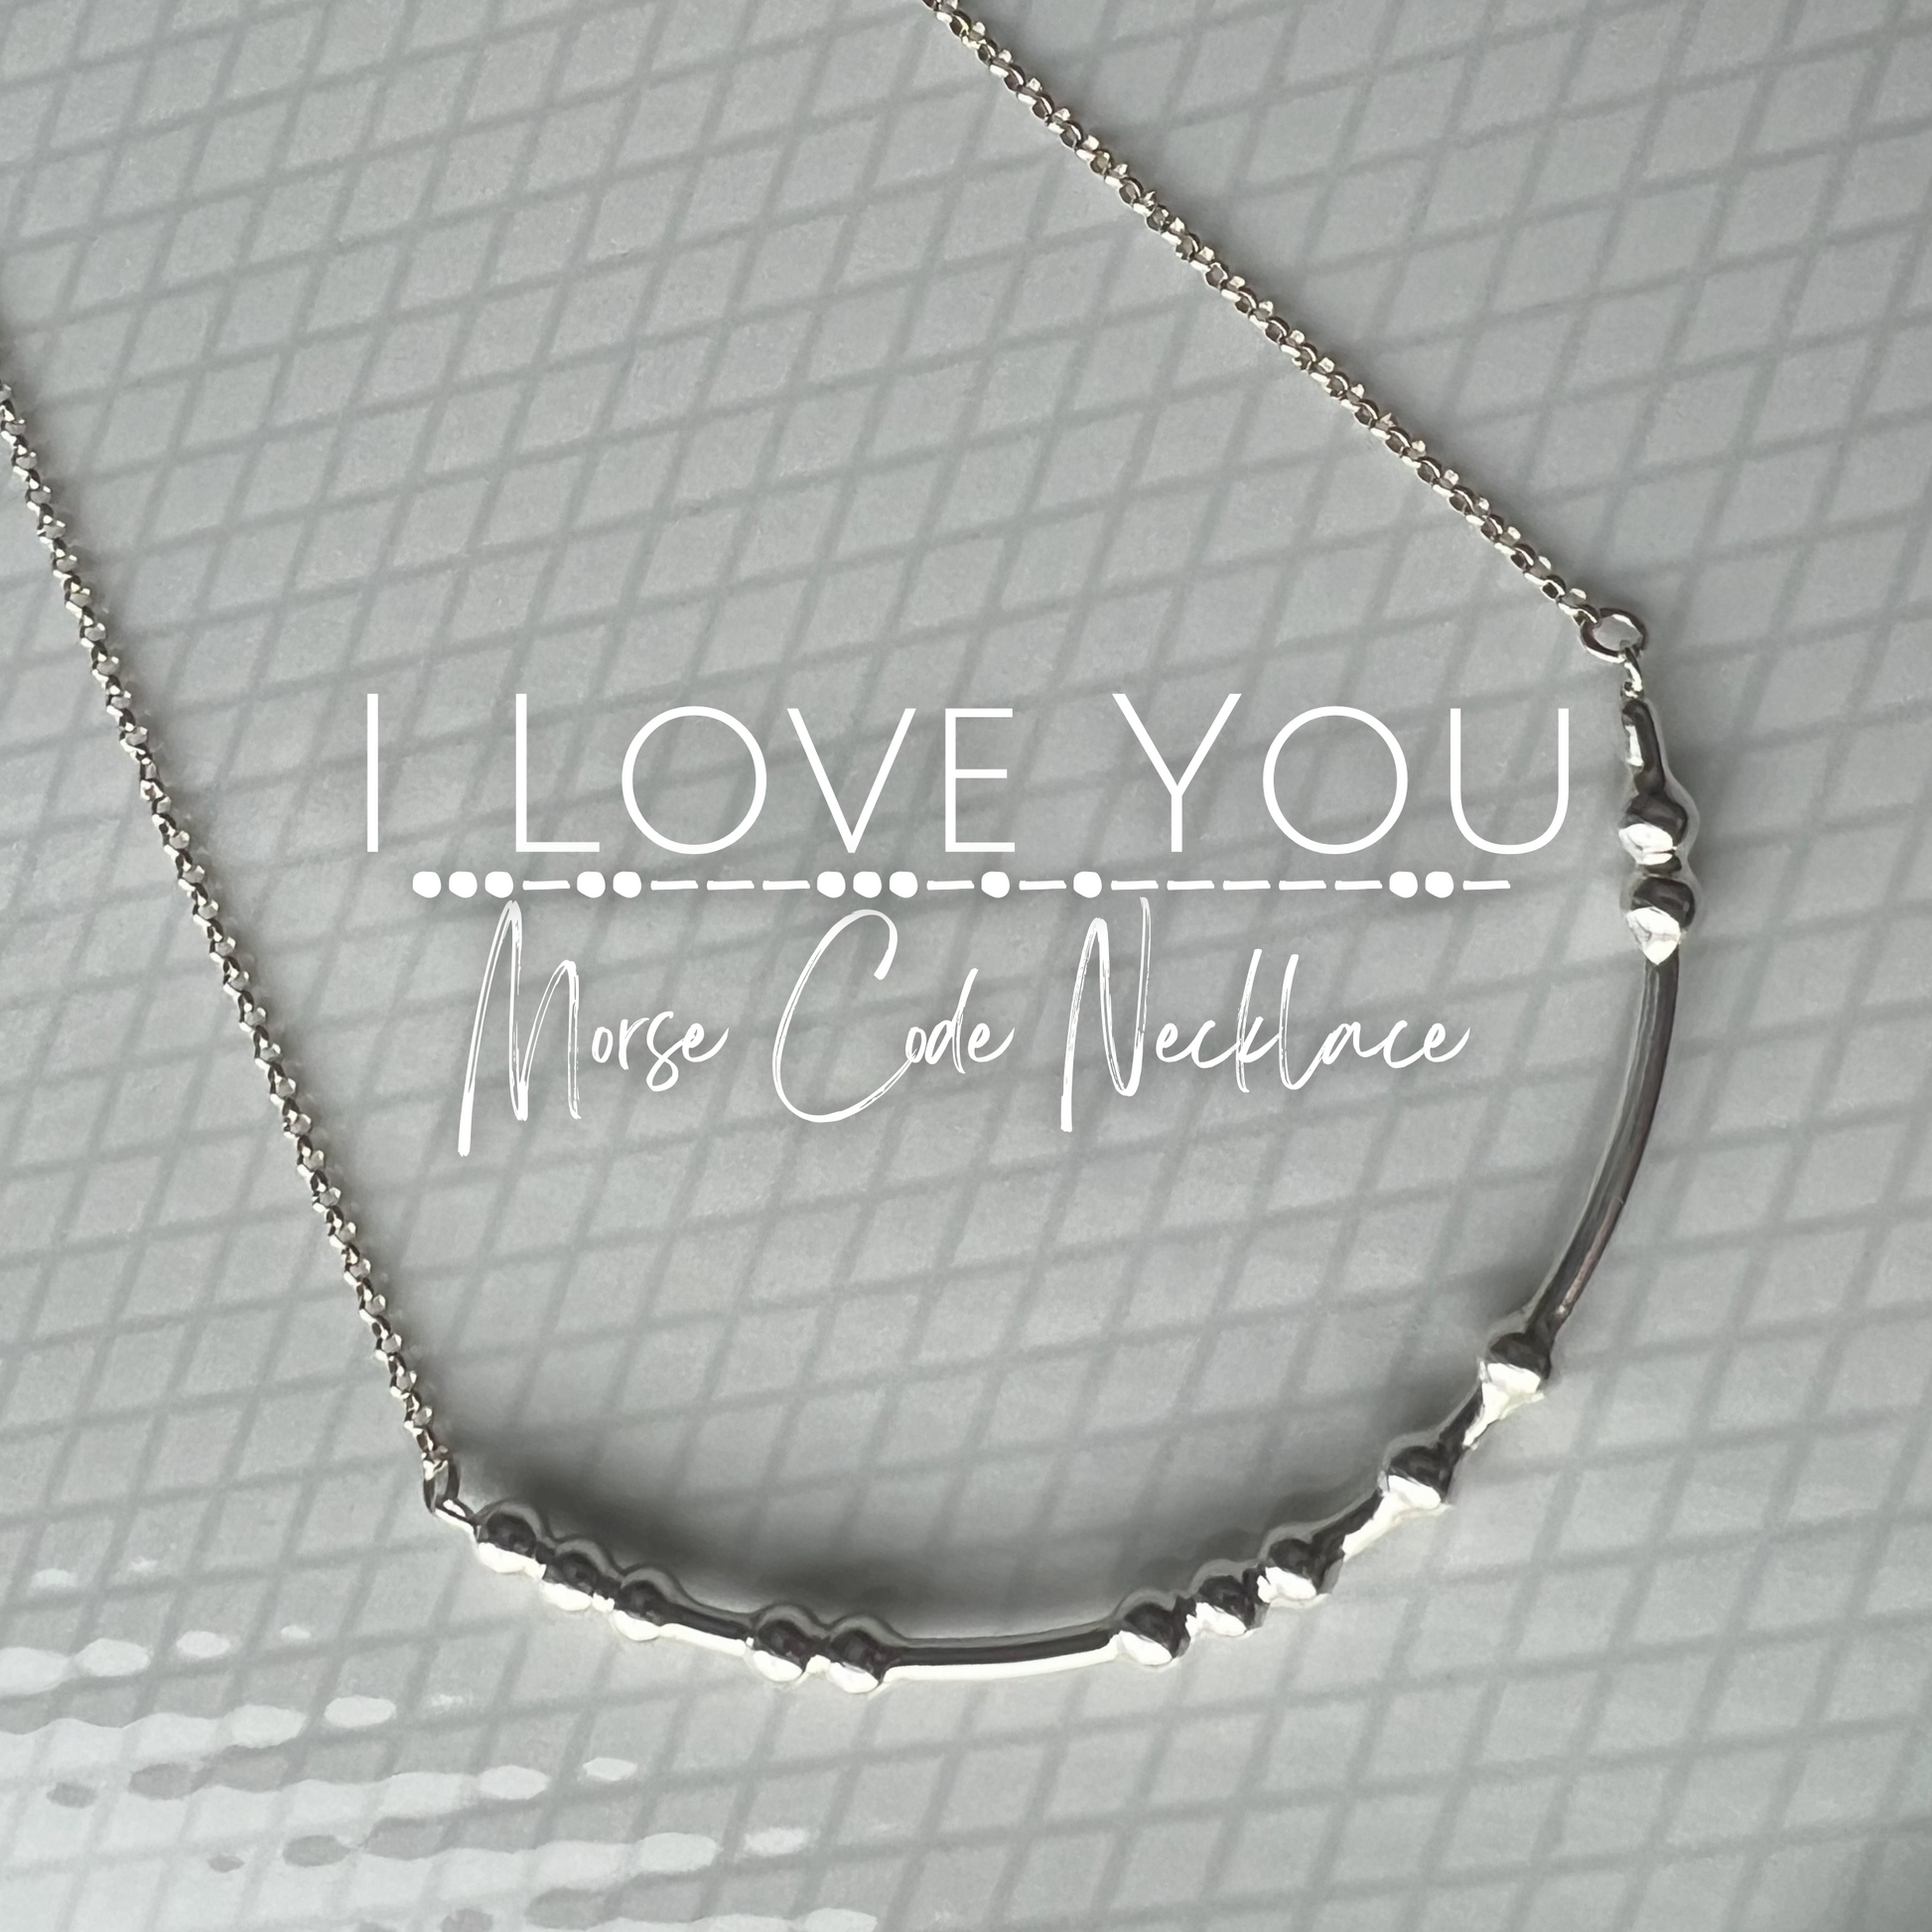 I Love You Morse Code Necklace laying on a plate